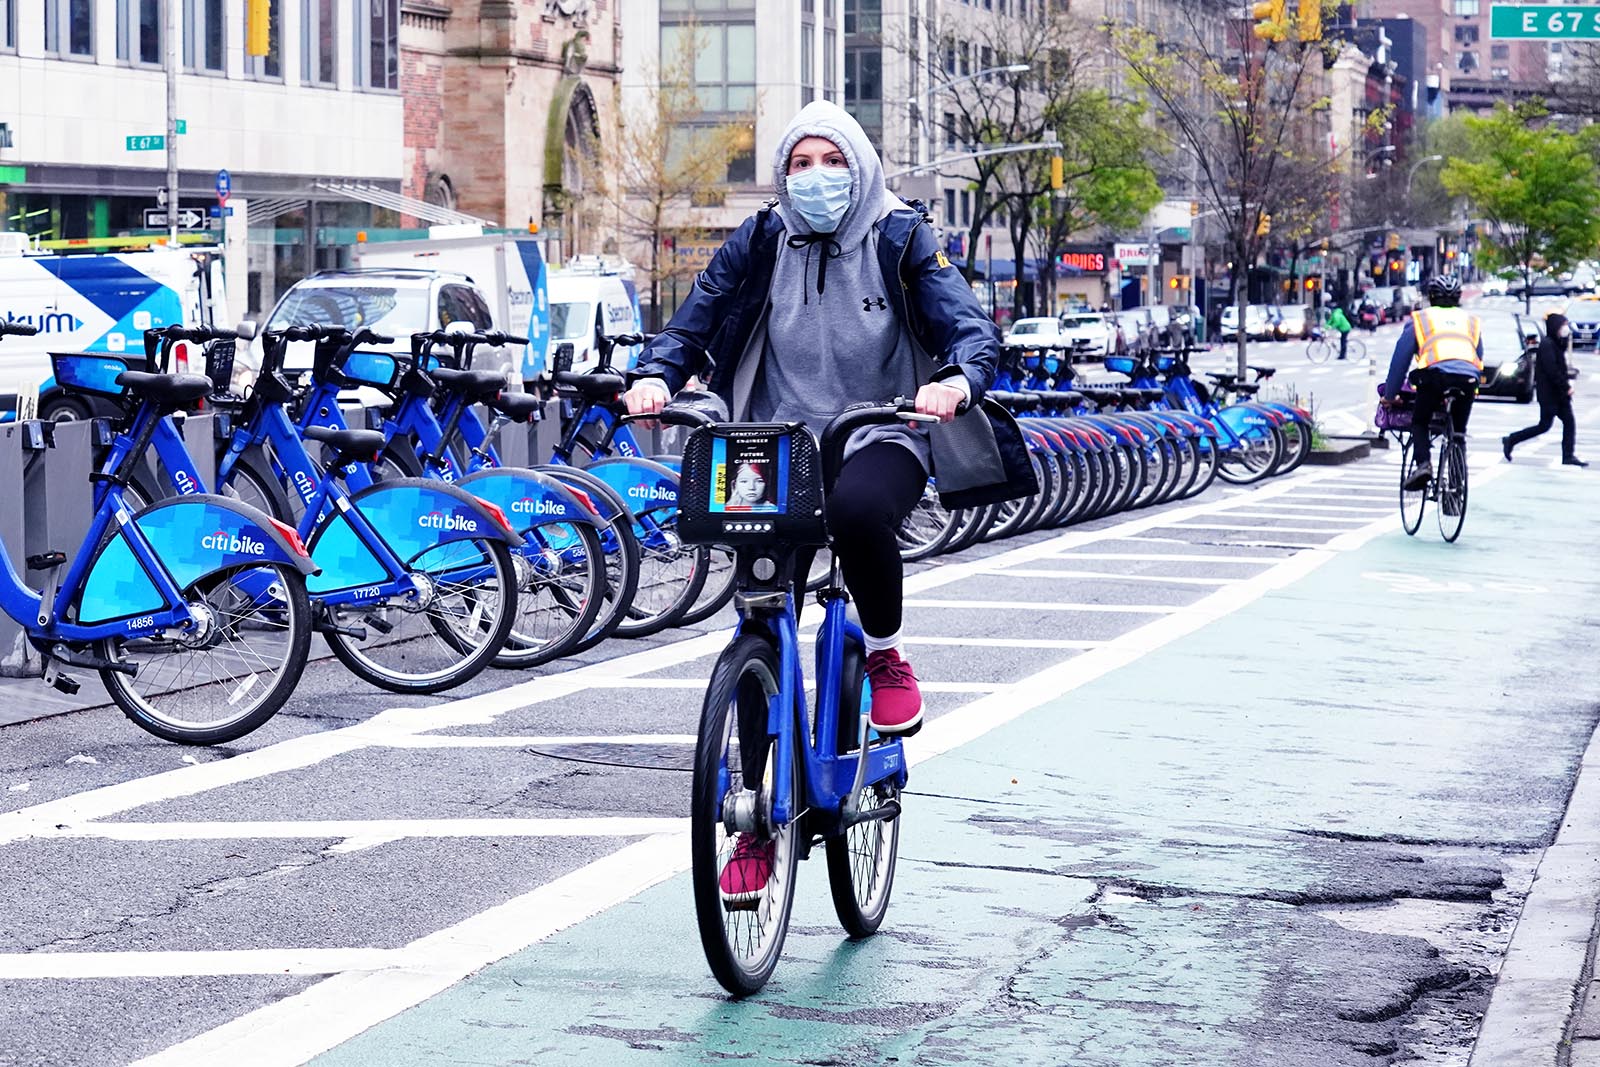 A woman rides a CitiBike in New York city while several other eBikes are parked in the background.